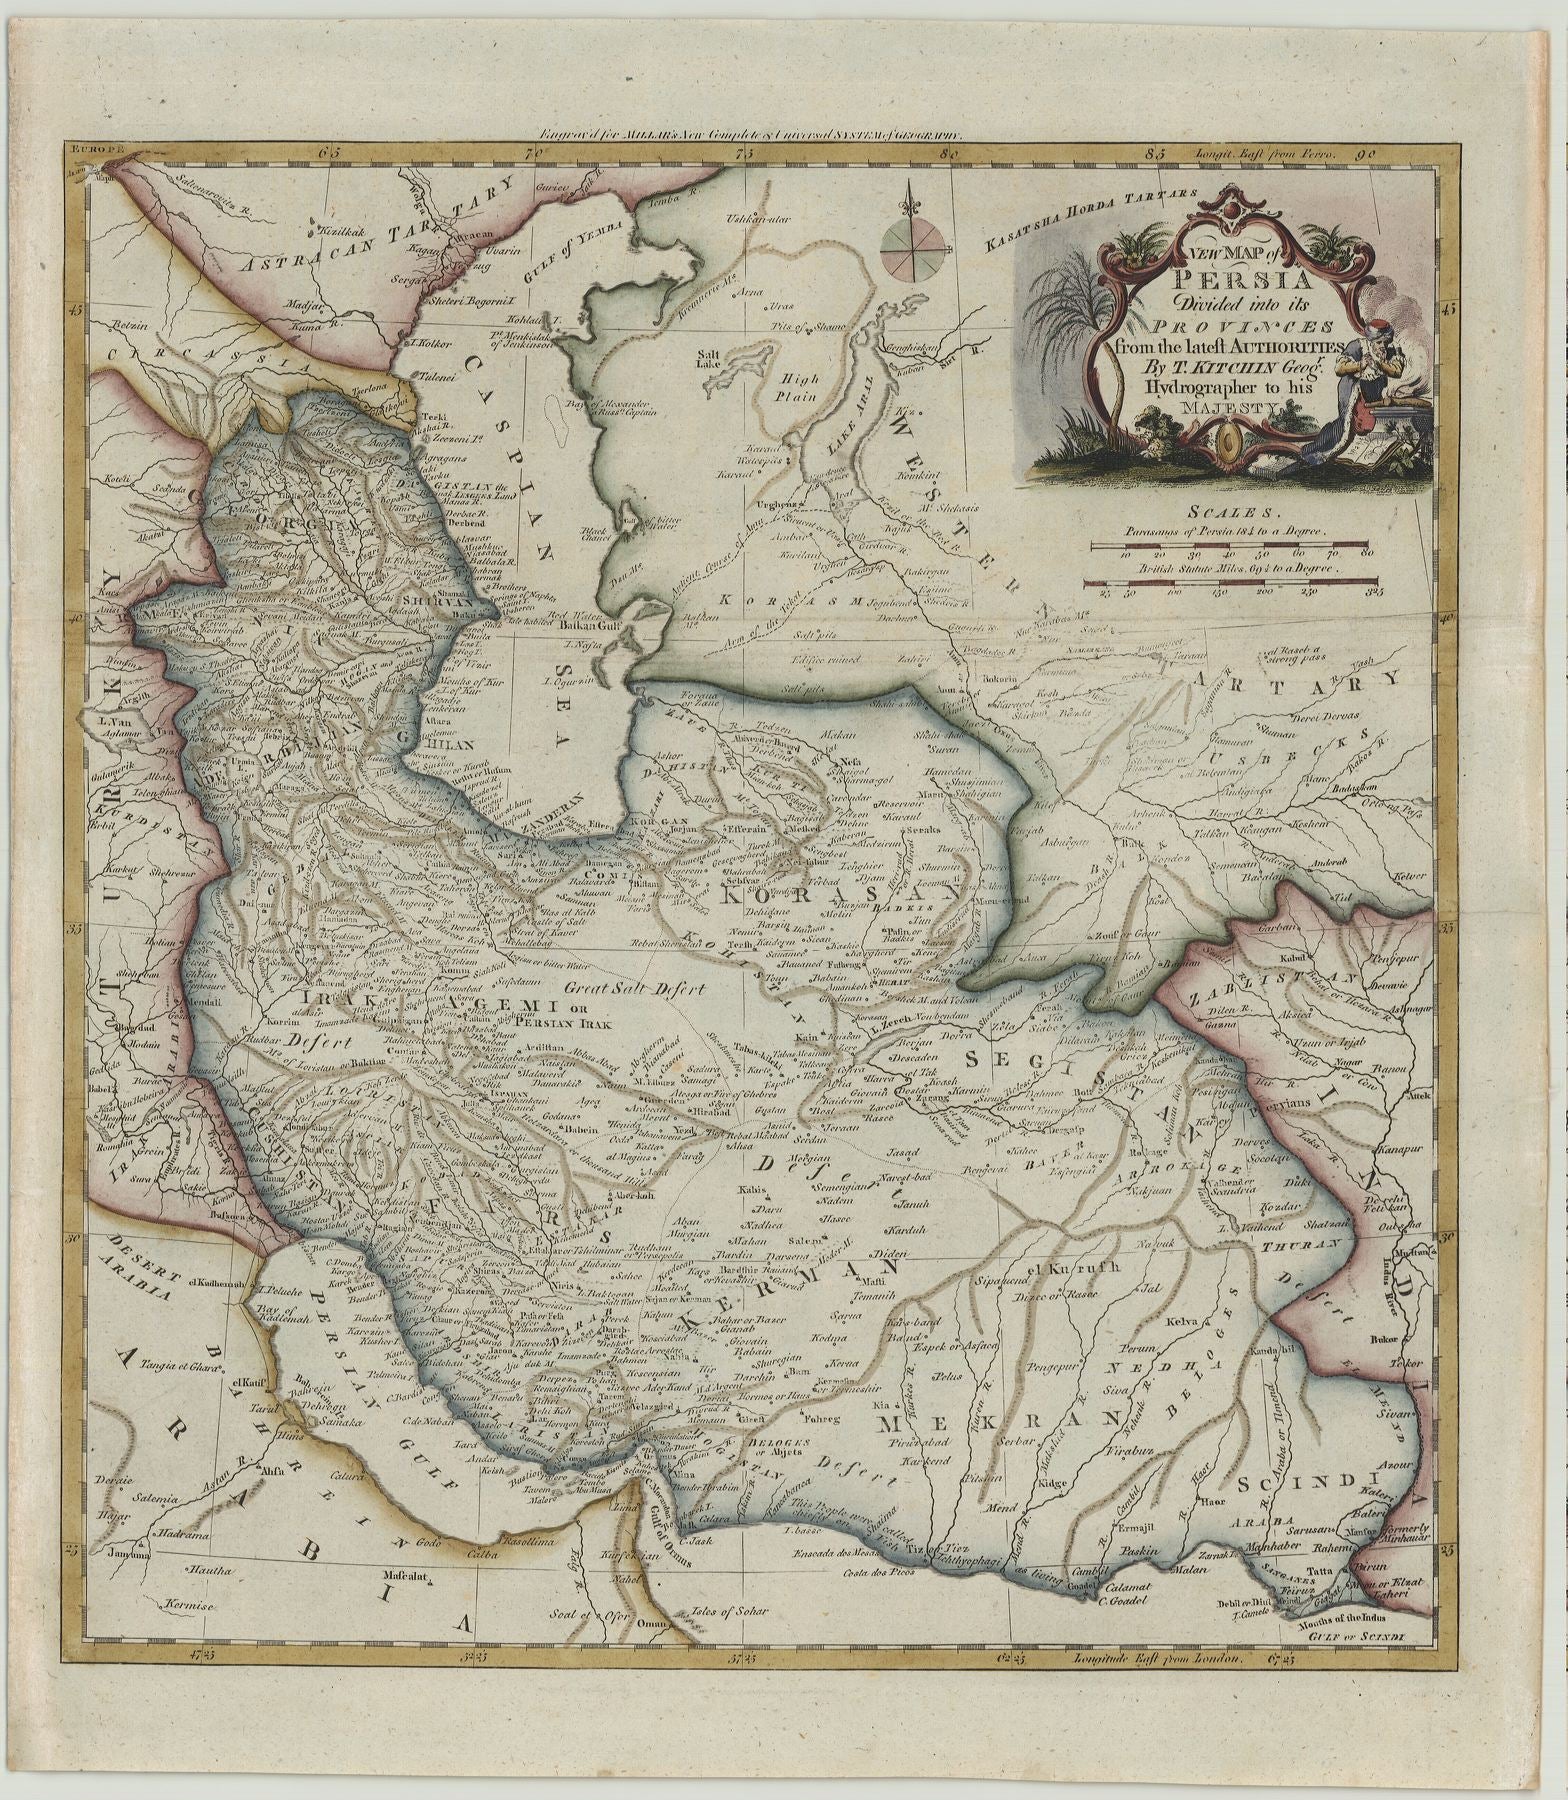 Kitchin, Thomas: New Map of Persia Divided into ist Provinces from the Latest Authorities. 1782